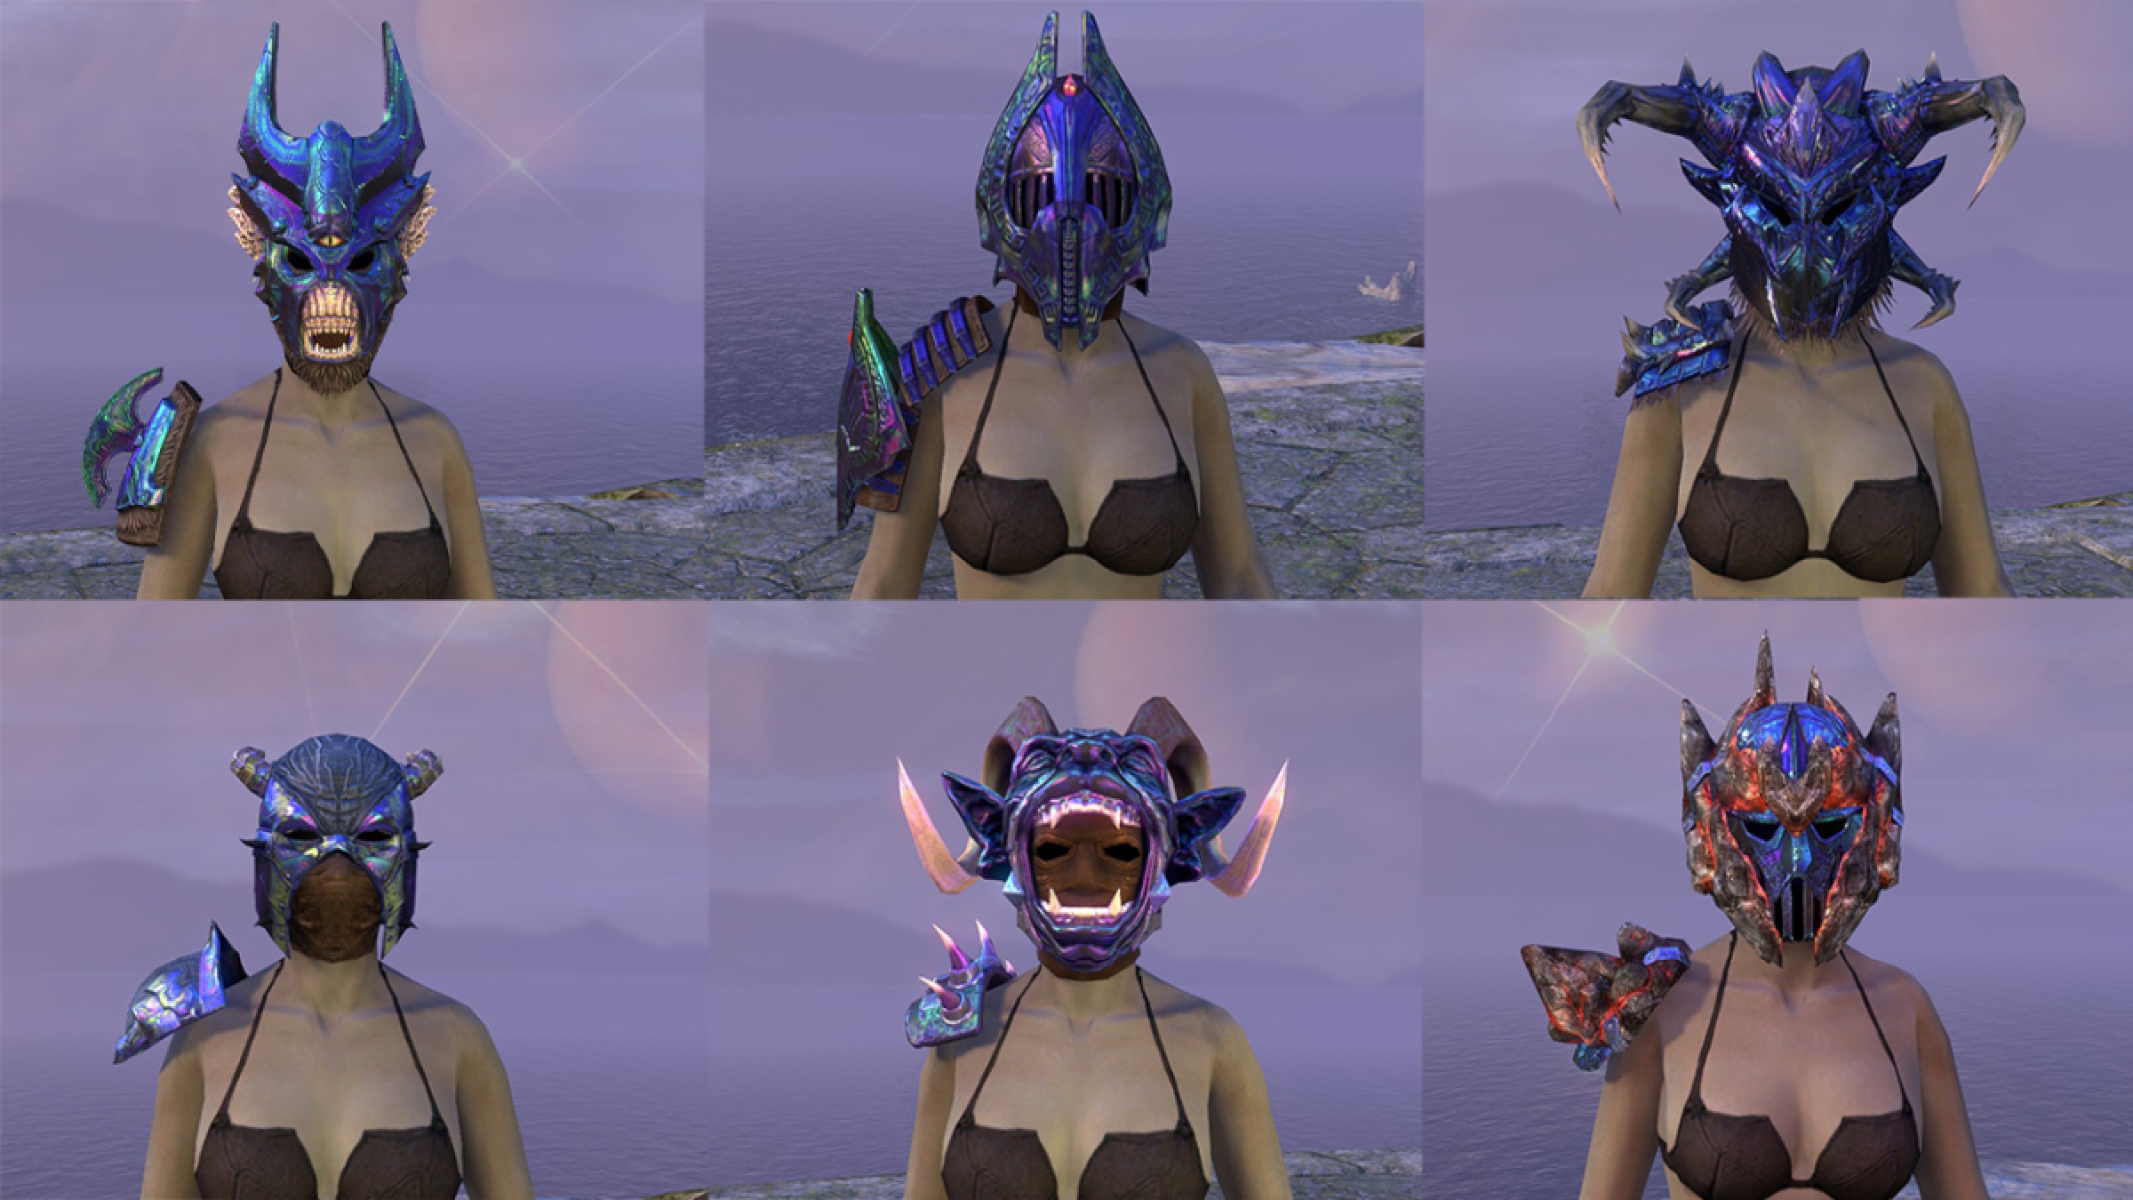 Opal Troll King, Engine Guardian, Chokethorn, Ilambris, Bloodspawn and the new Earthgore Mask and Shoulder Outfit Styles